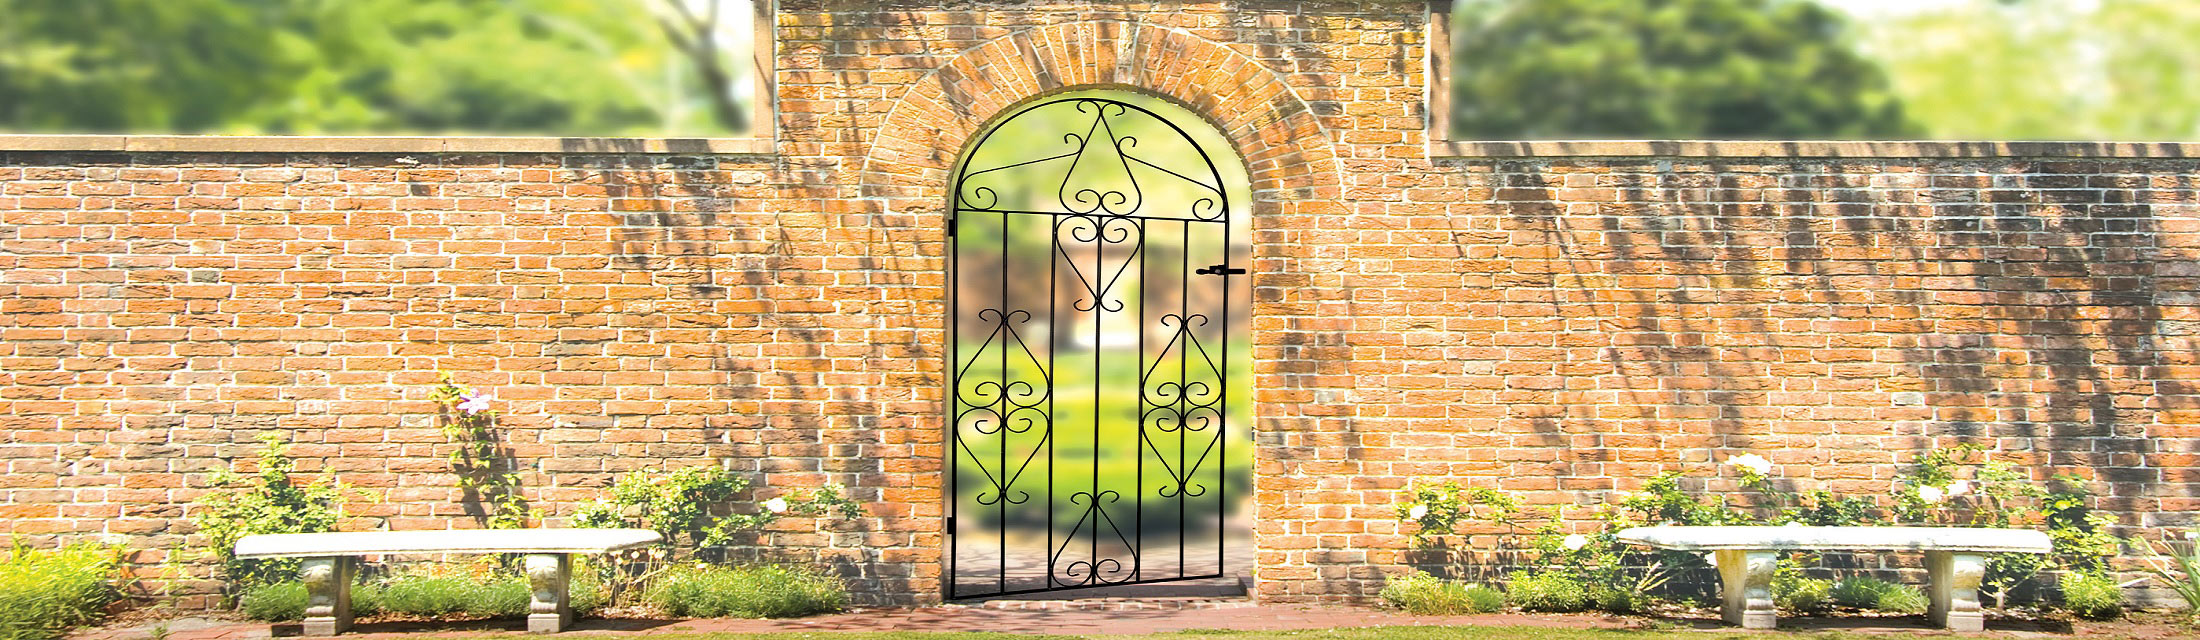 Metal side gate installed into a brick archway within a wall